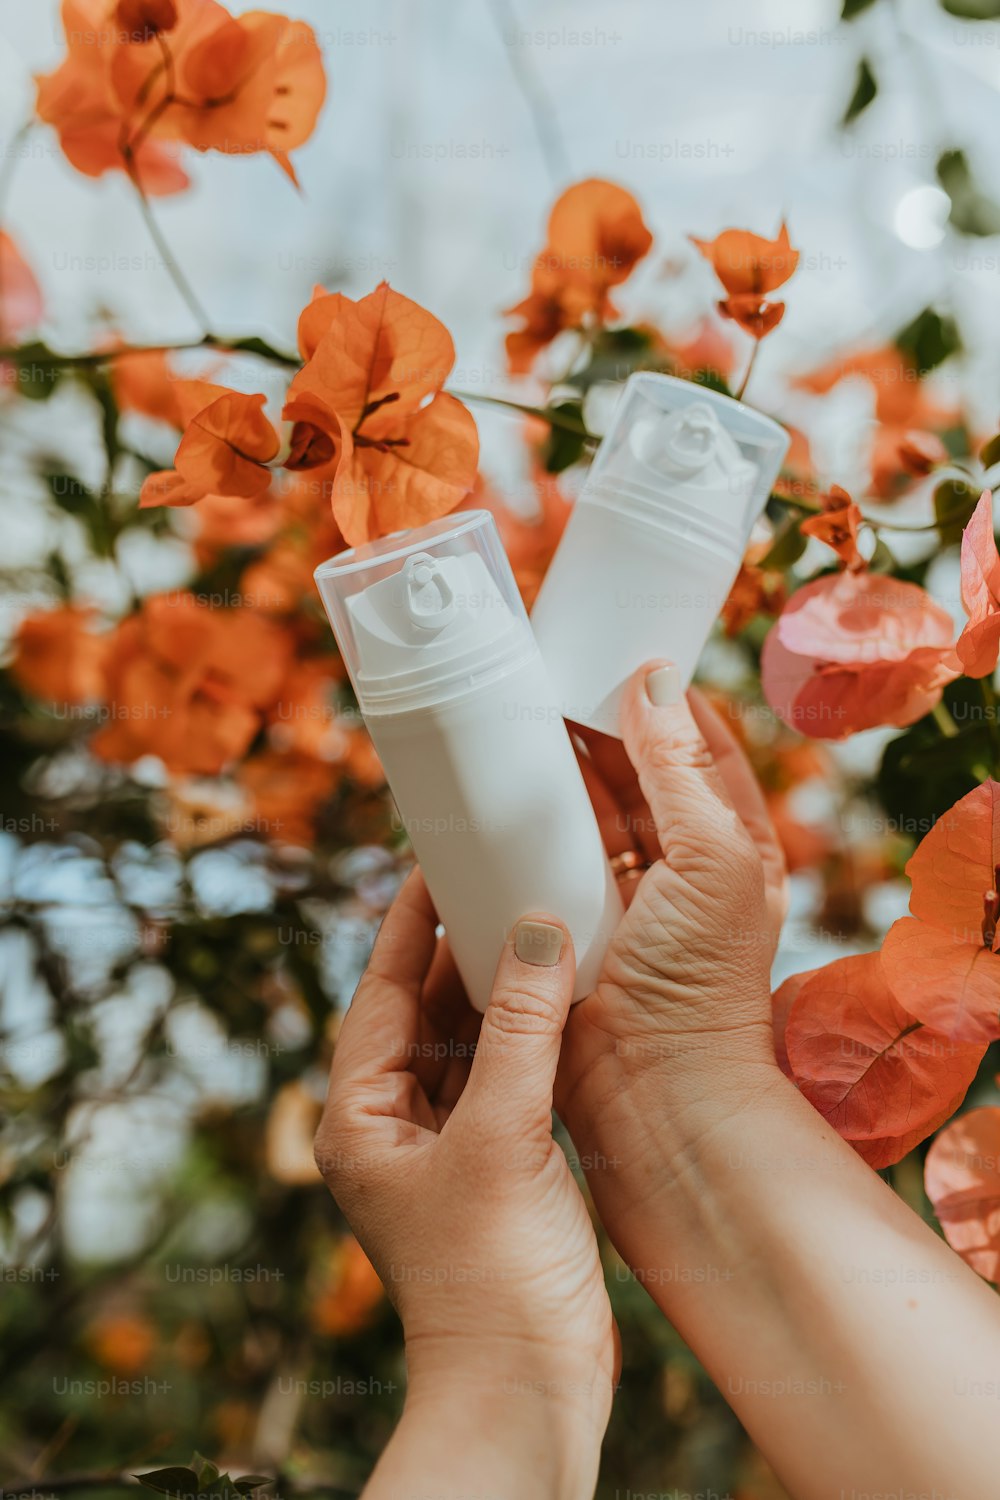 a person holding a tube of lotion in front of flowers